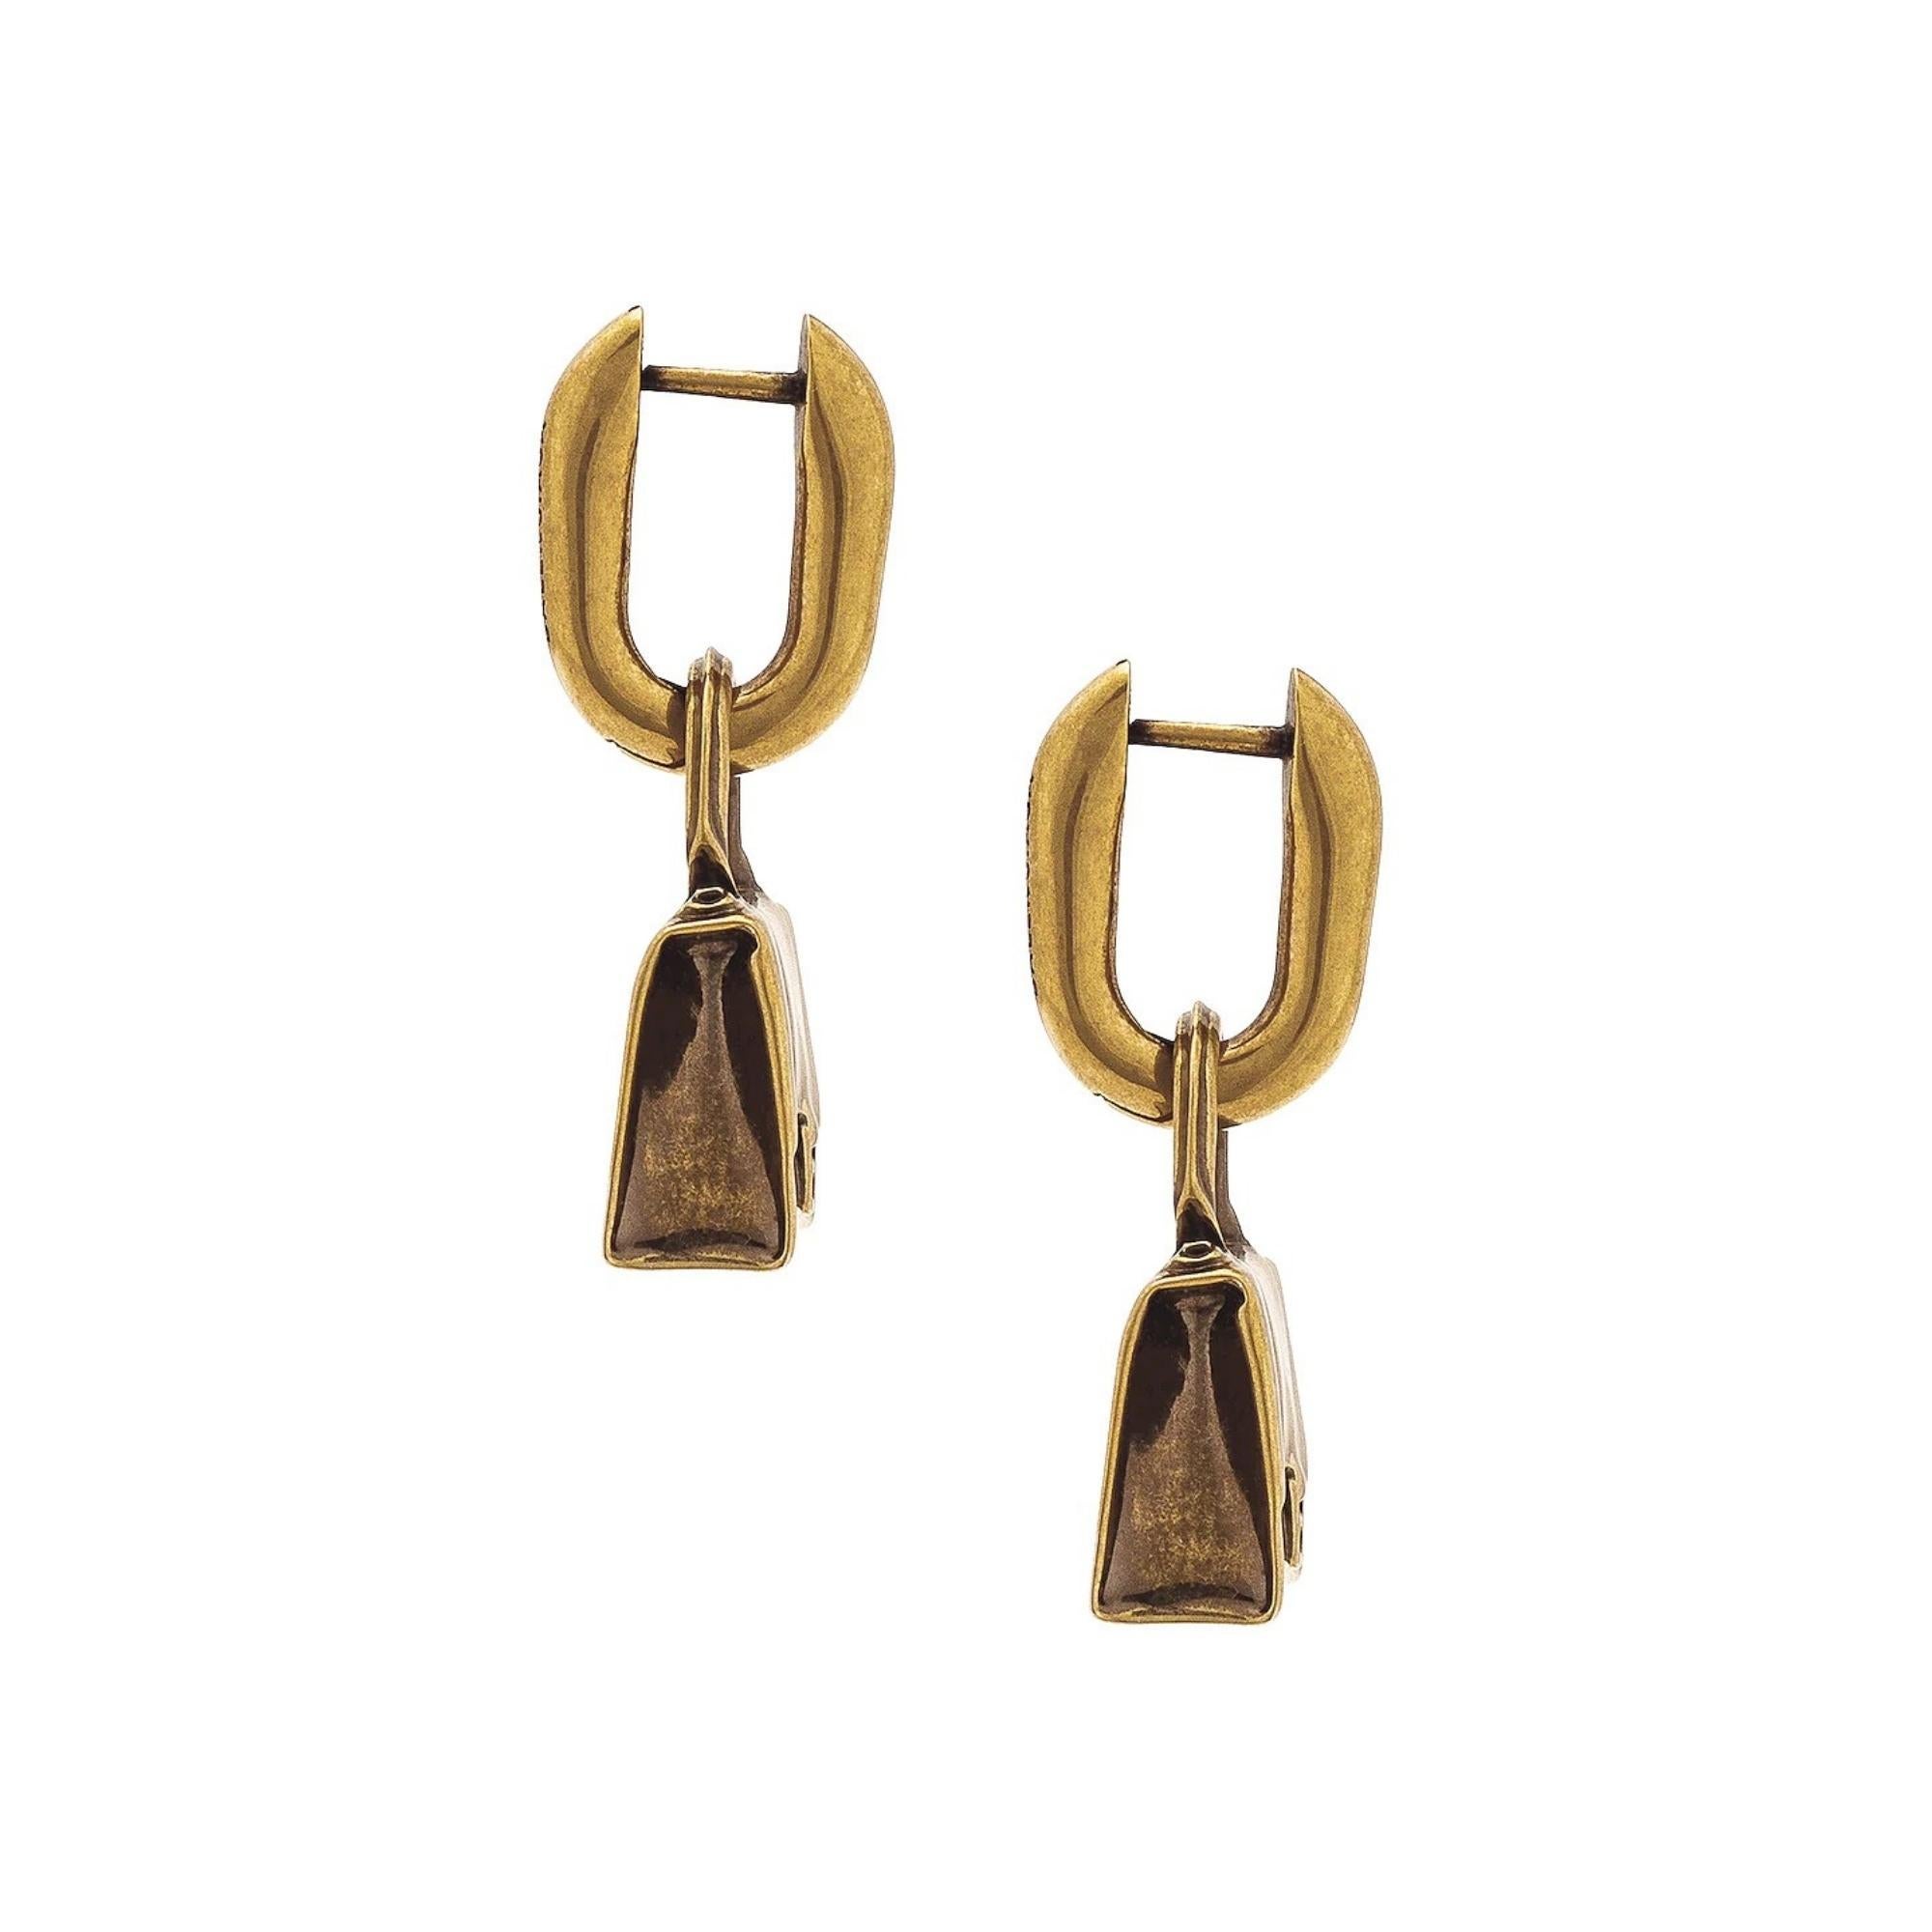 Antique gold-tone earrings from Balenciaga. Crafted from a brass and bronze alloy, this pair features iconic ‘Hourglass’ bag charms.

Color: Antique Gold tone
Material: 80% Bronze, 20% Brass
Marks: Balenciaga Made In Italy
Clasp Style: For pierced